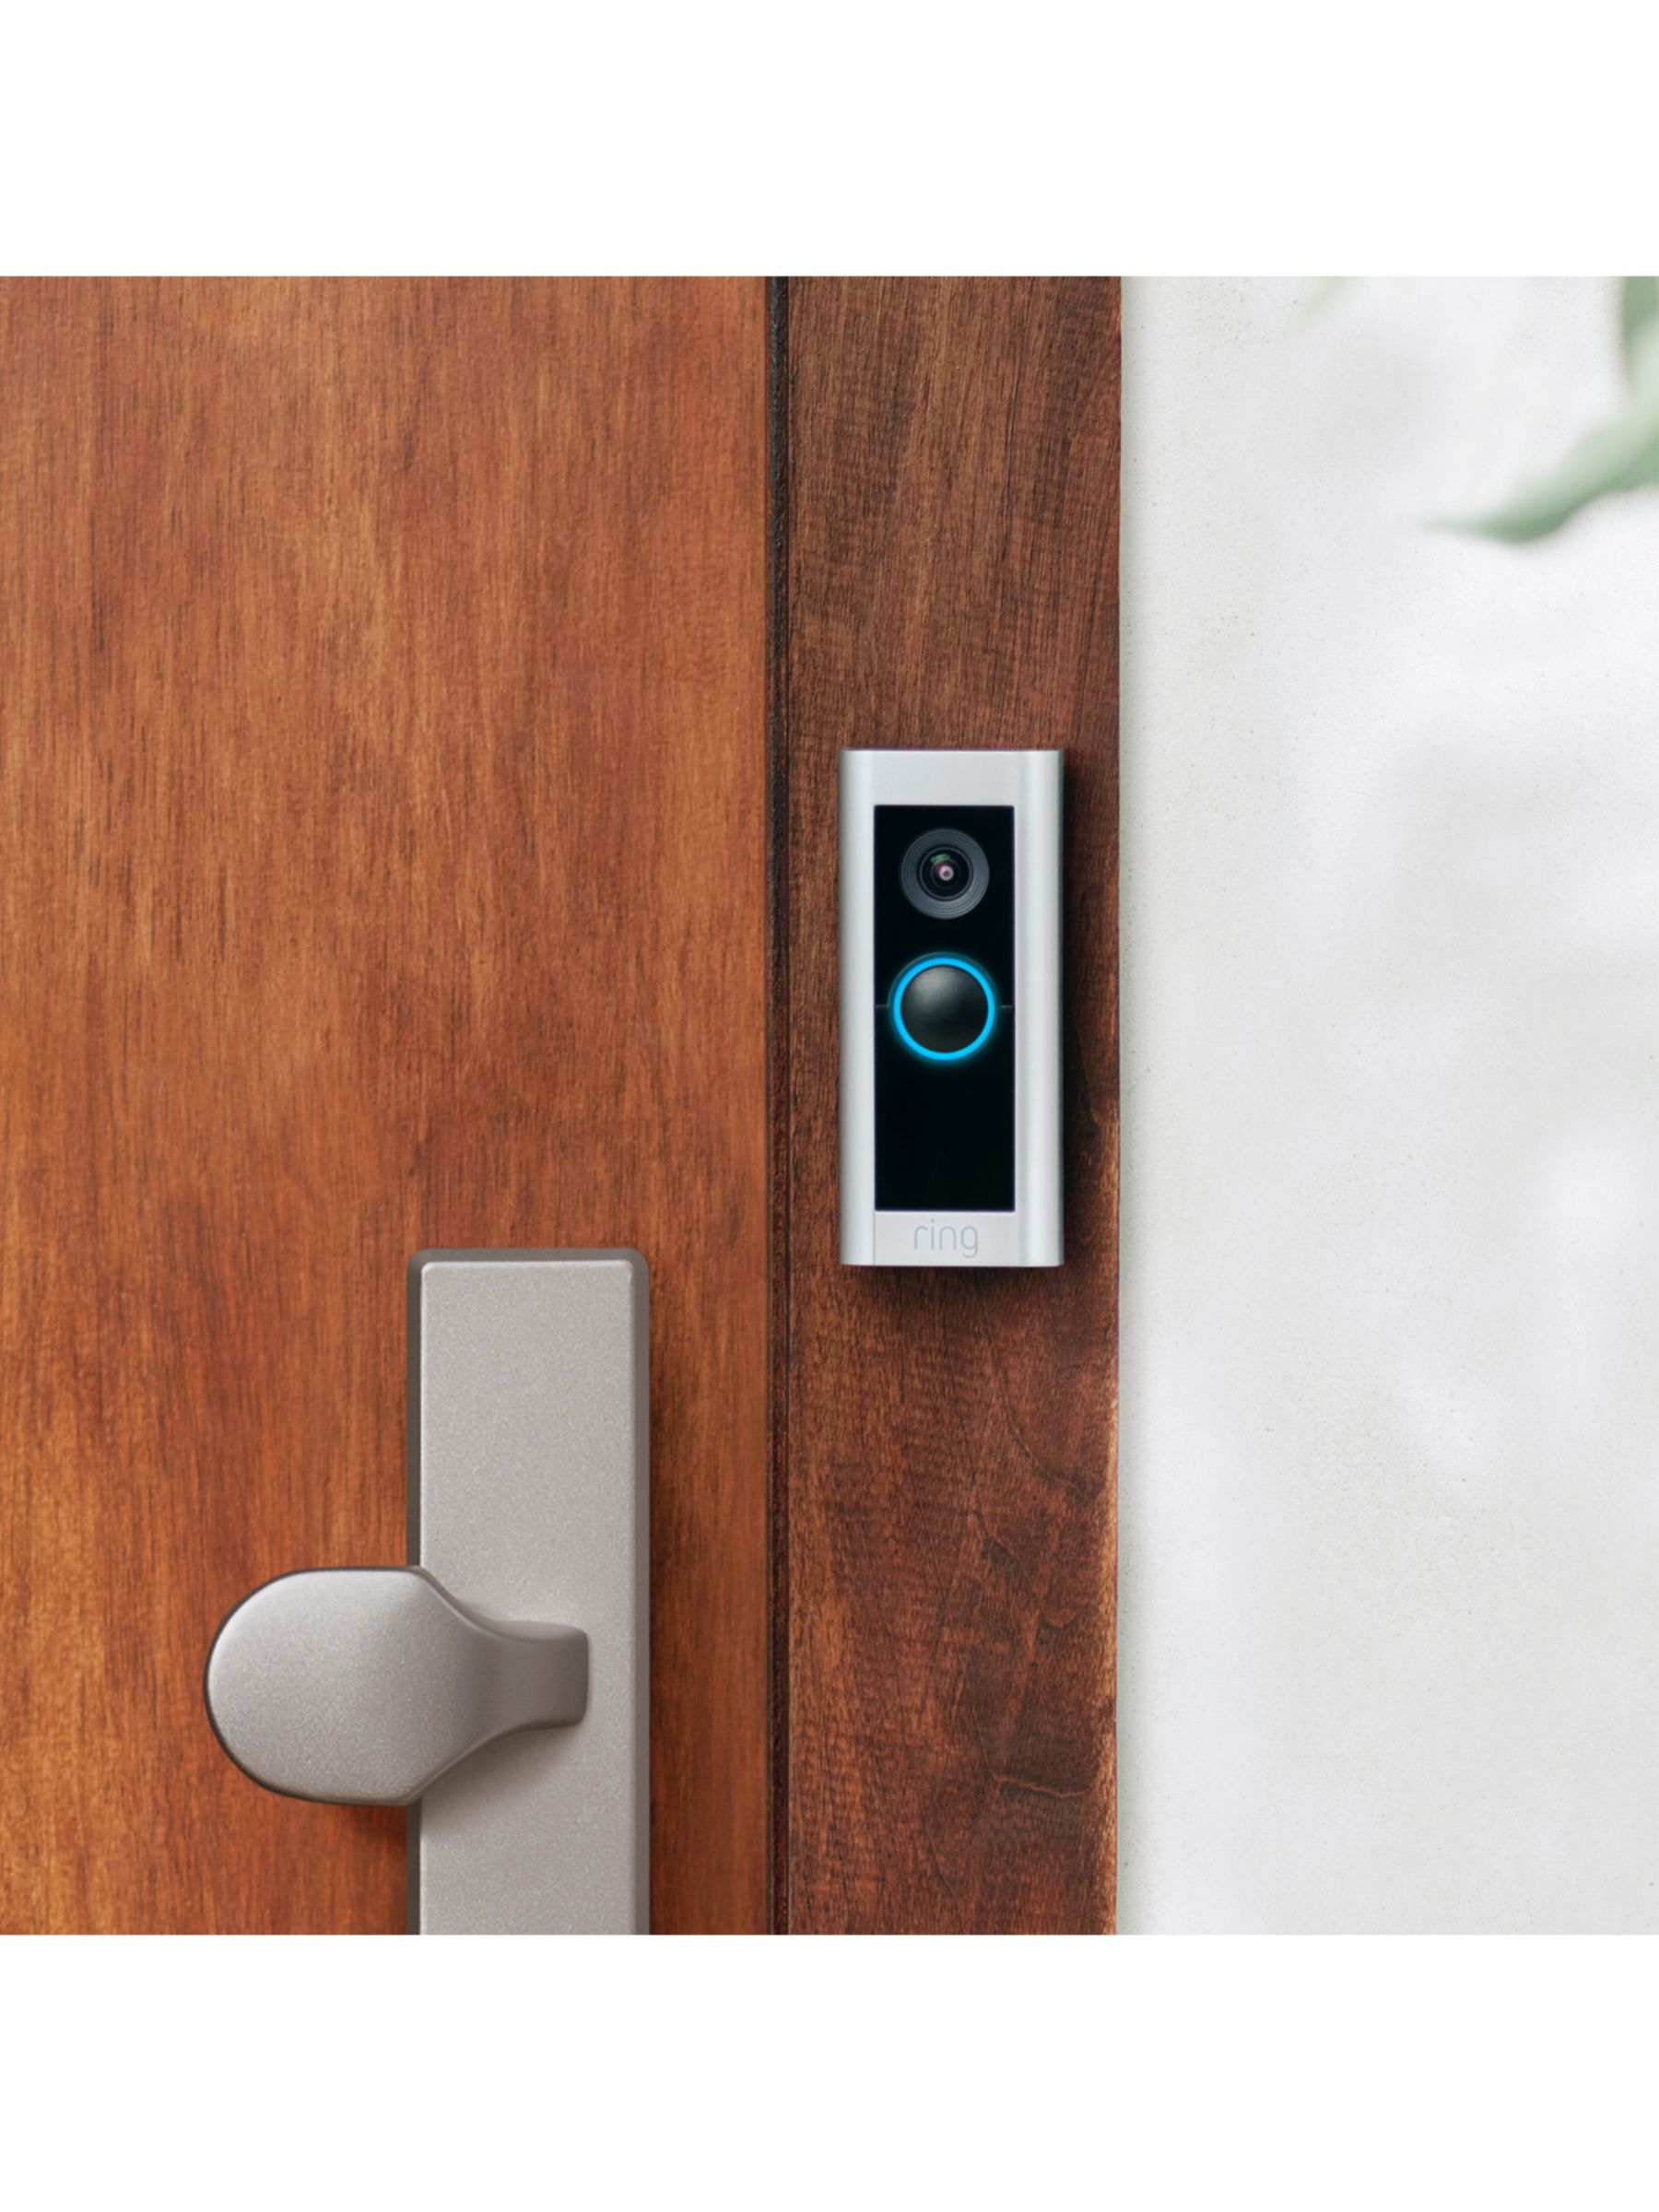 Ring Wired Video Doorbell Pro 2 : Target